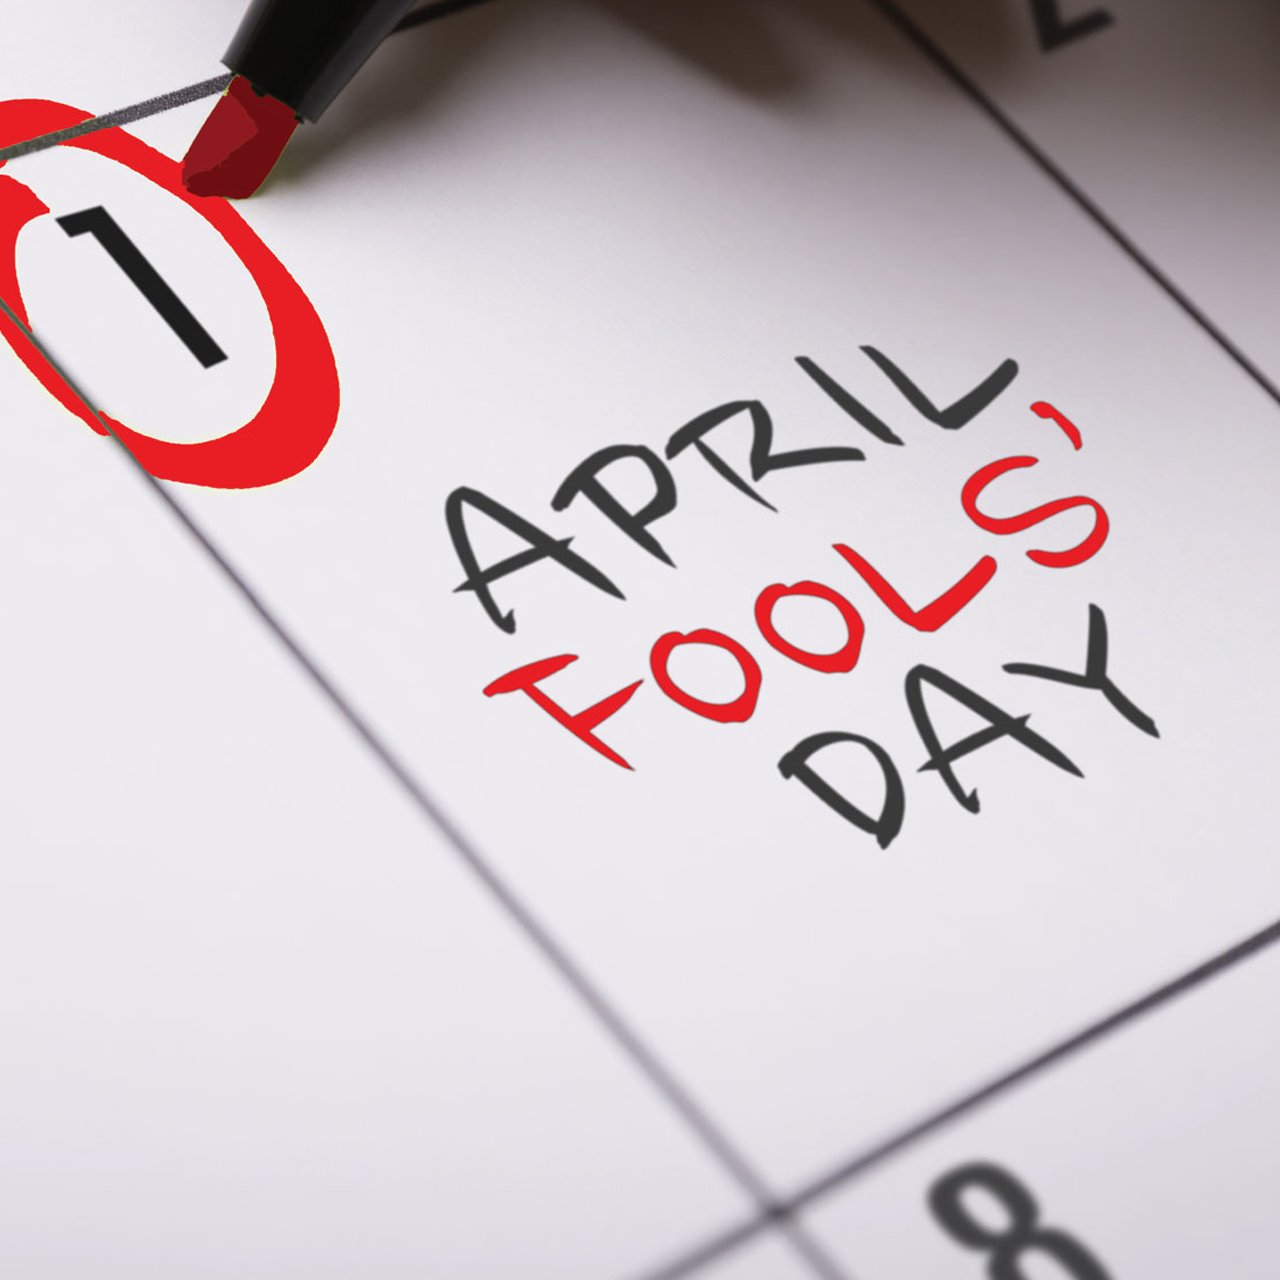 The Best Business April Fools Jokes in 2018